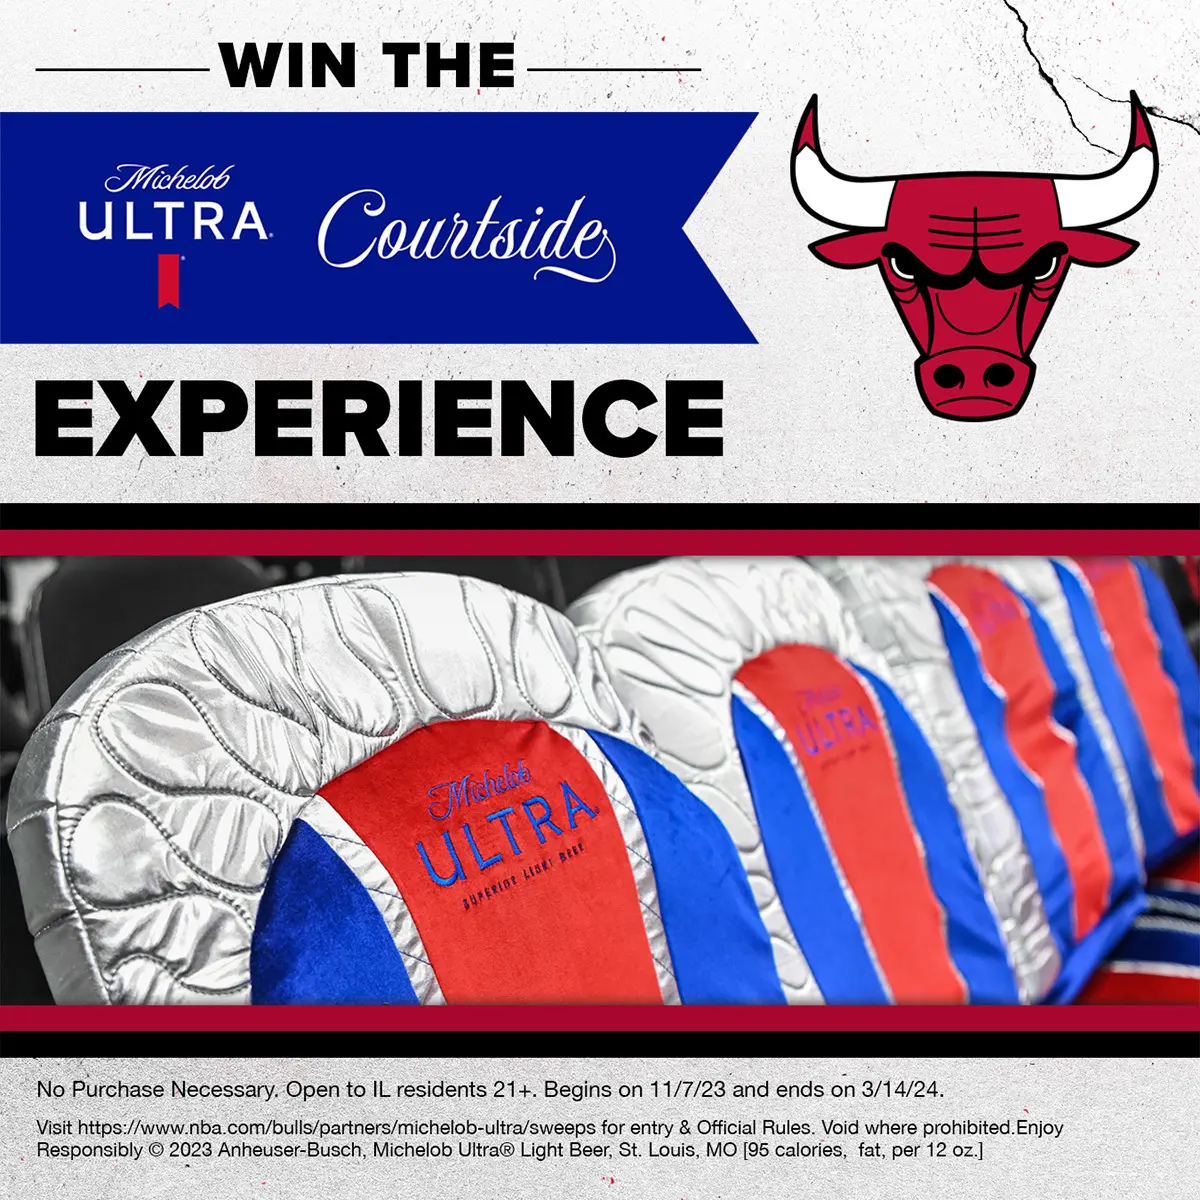 Win the Michelob Ultra Courtside Experience. No Purchase Necessary. Open to IL residents 21+. Begins on 11/7/23 and ends on 3/14/24.